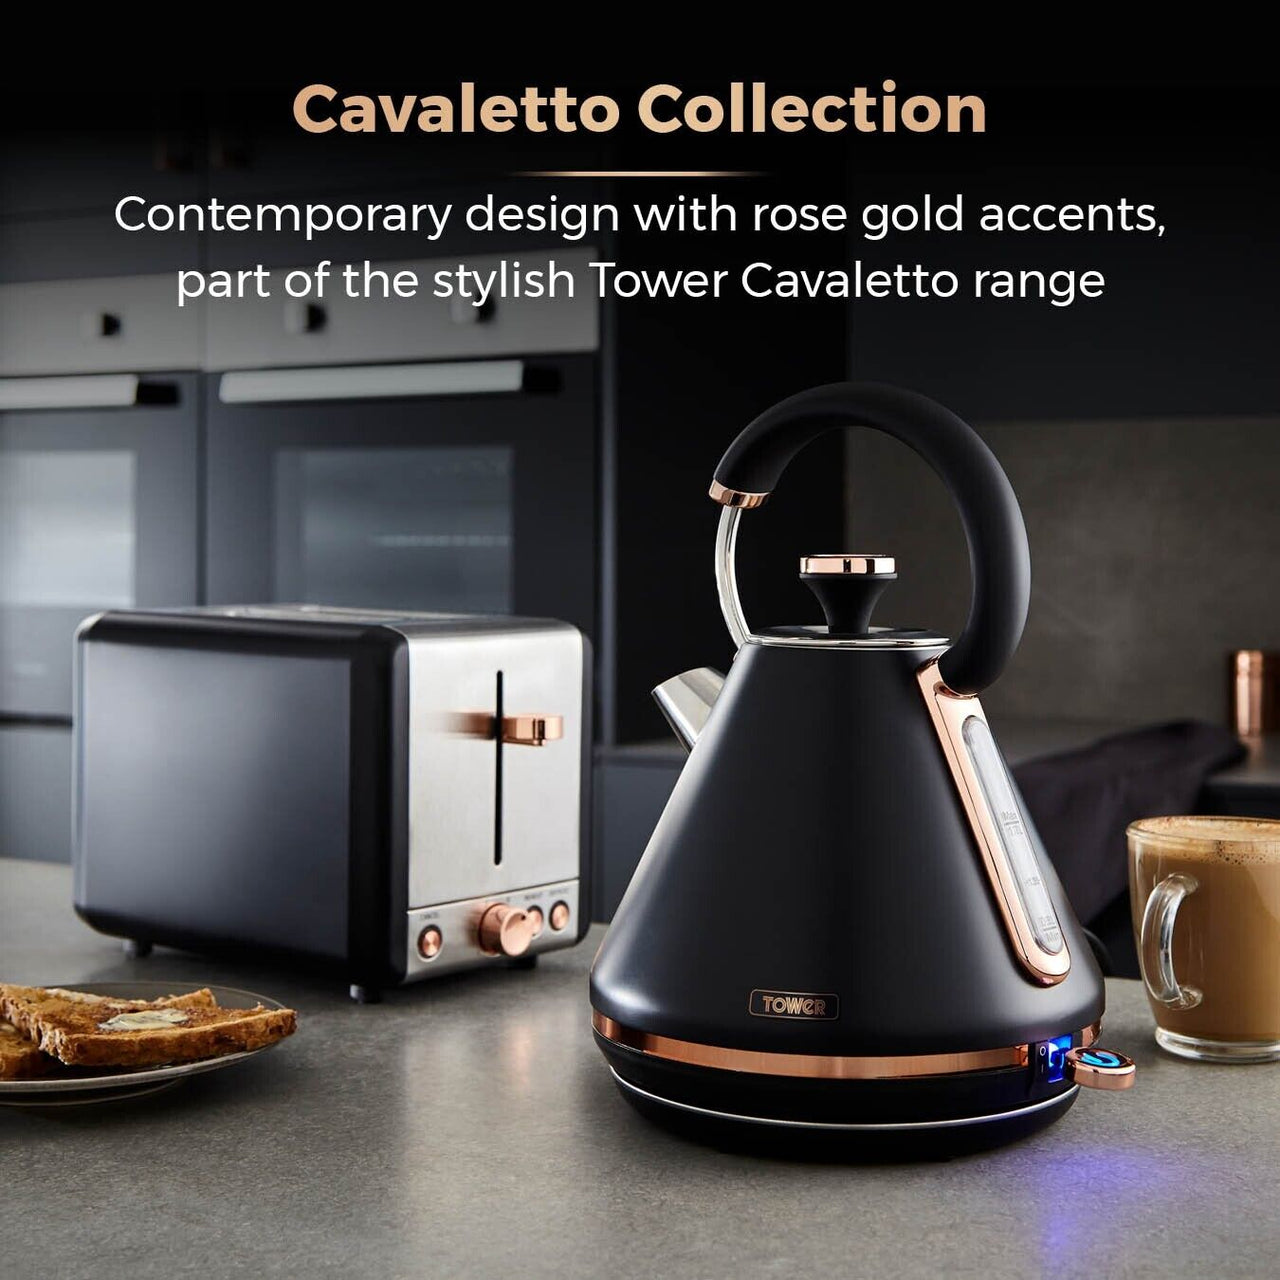 Tower Cavaletto Black & Rose Gold Pyramid Kettle 2 Slice Toaster & Microwave Set